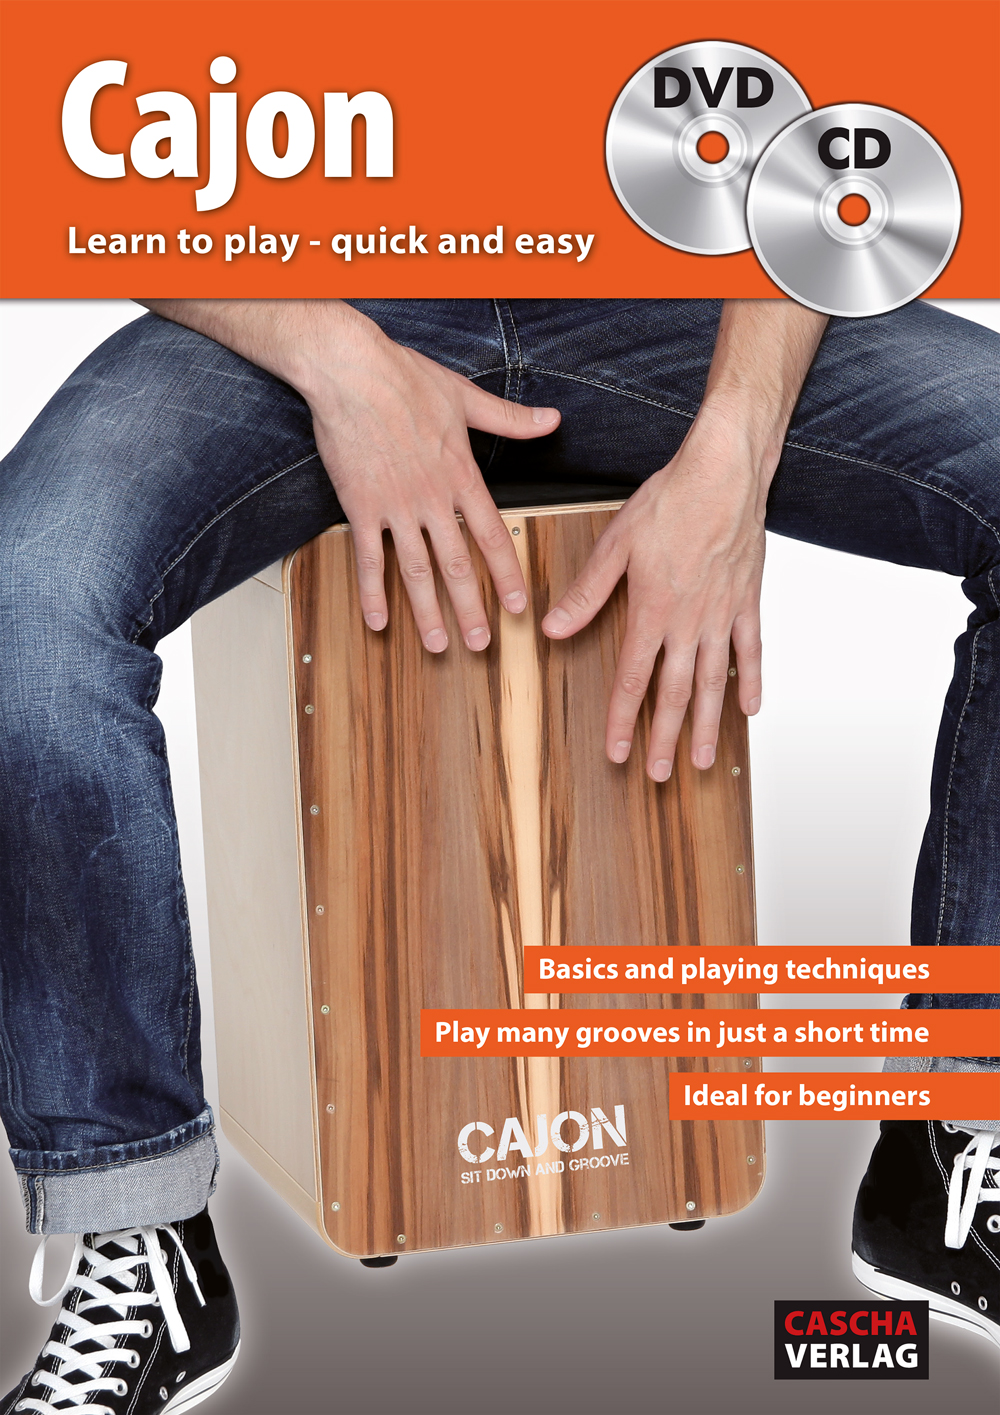 Cajon - Learn to play quick and easy